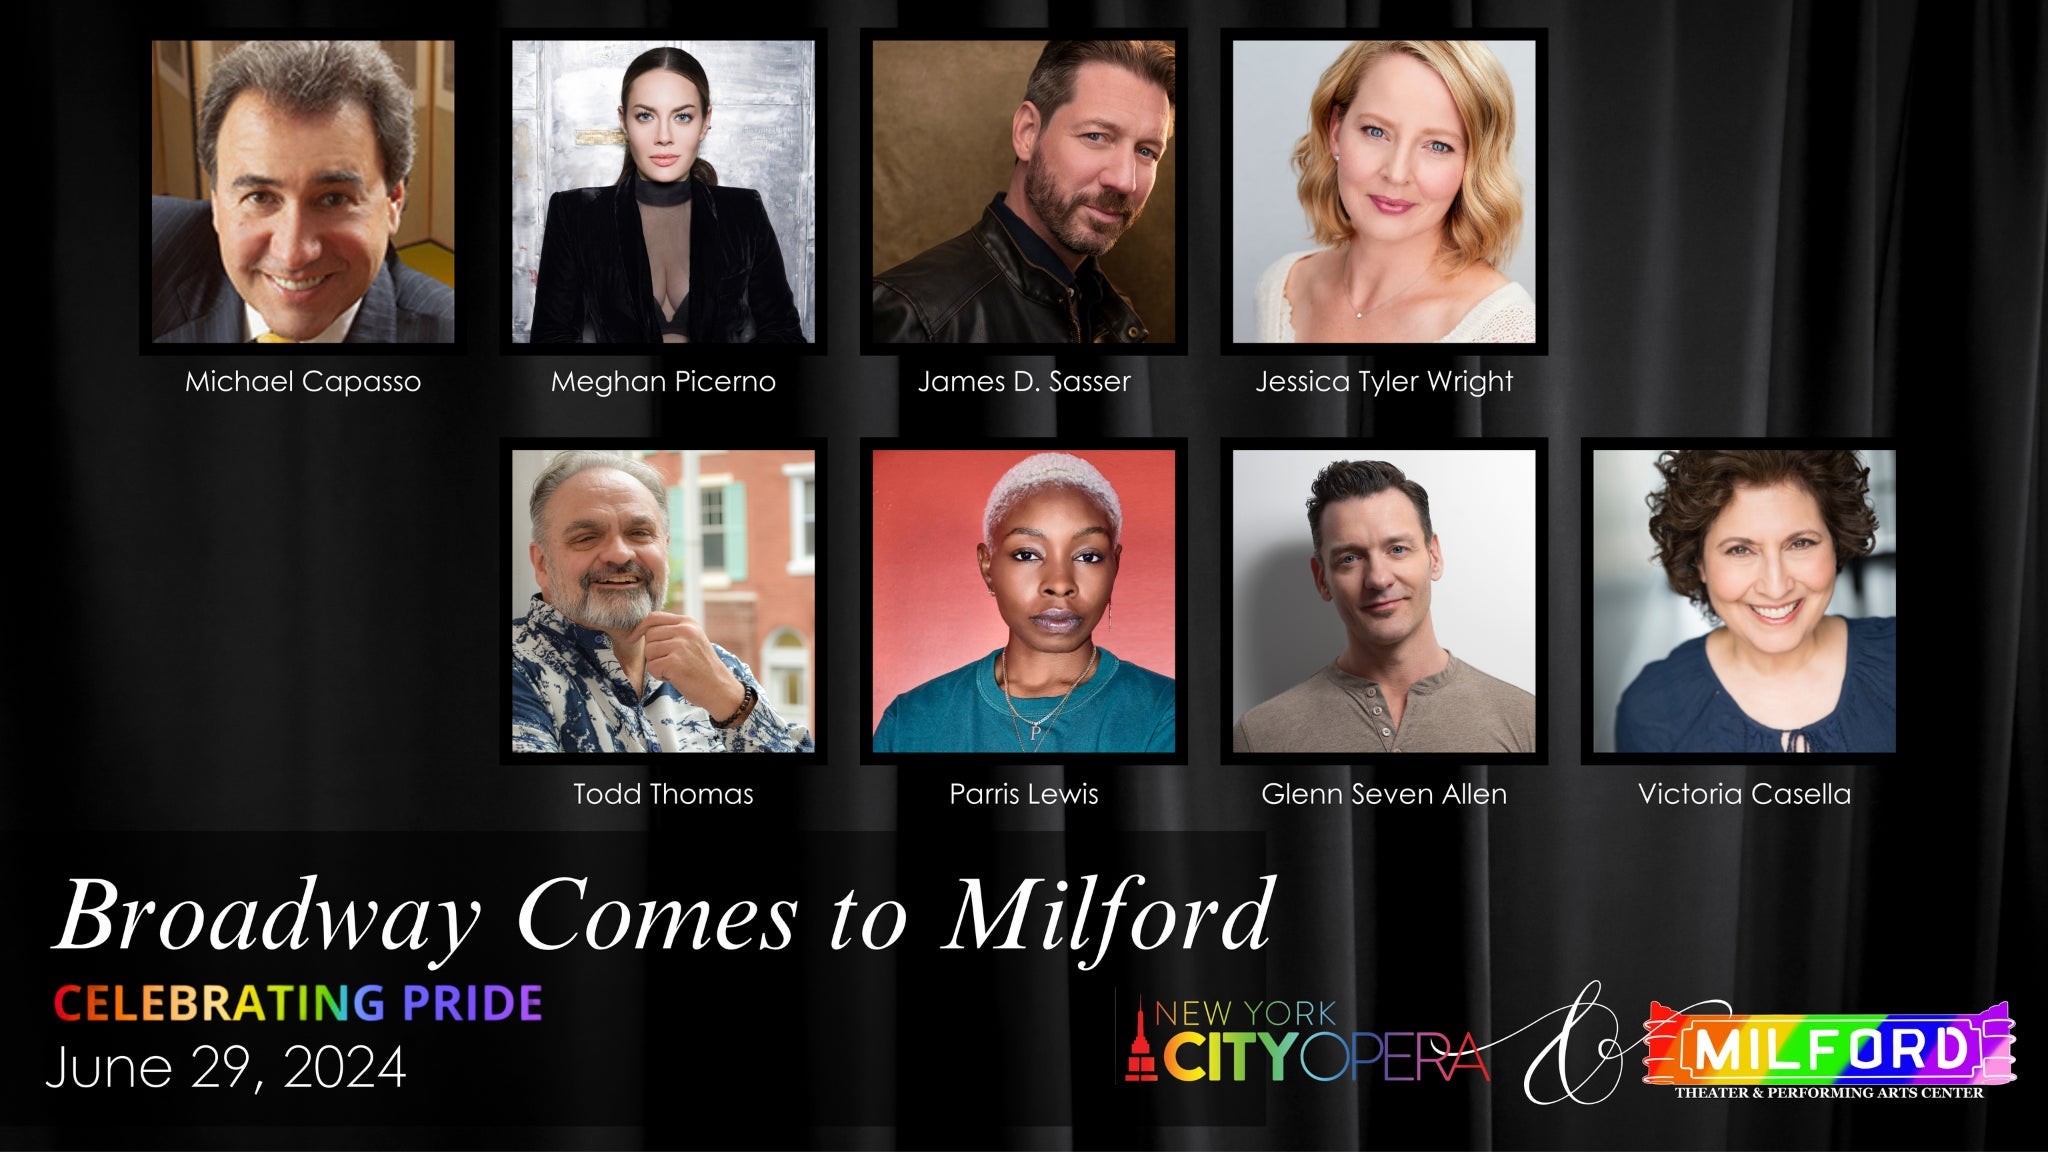 Broadway Comes to Milford! in Milford promo photo for Ghostlight Member Early Access presale offer code